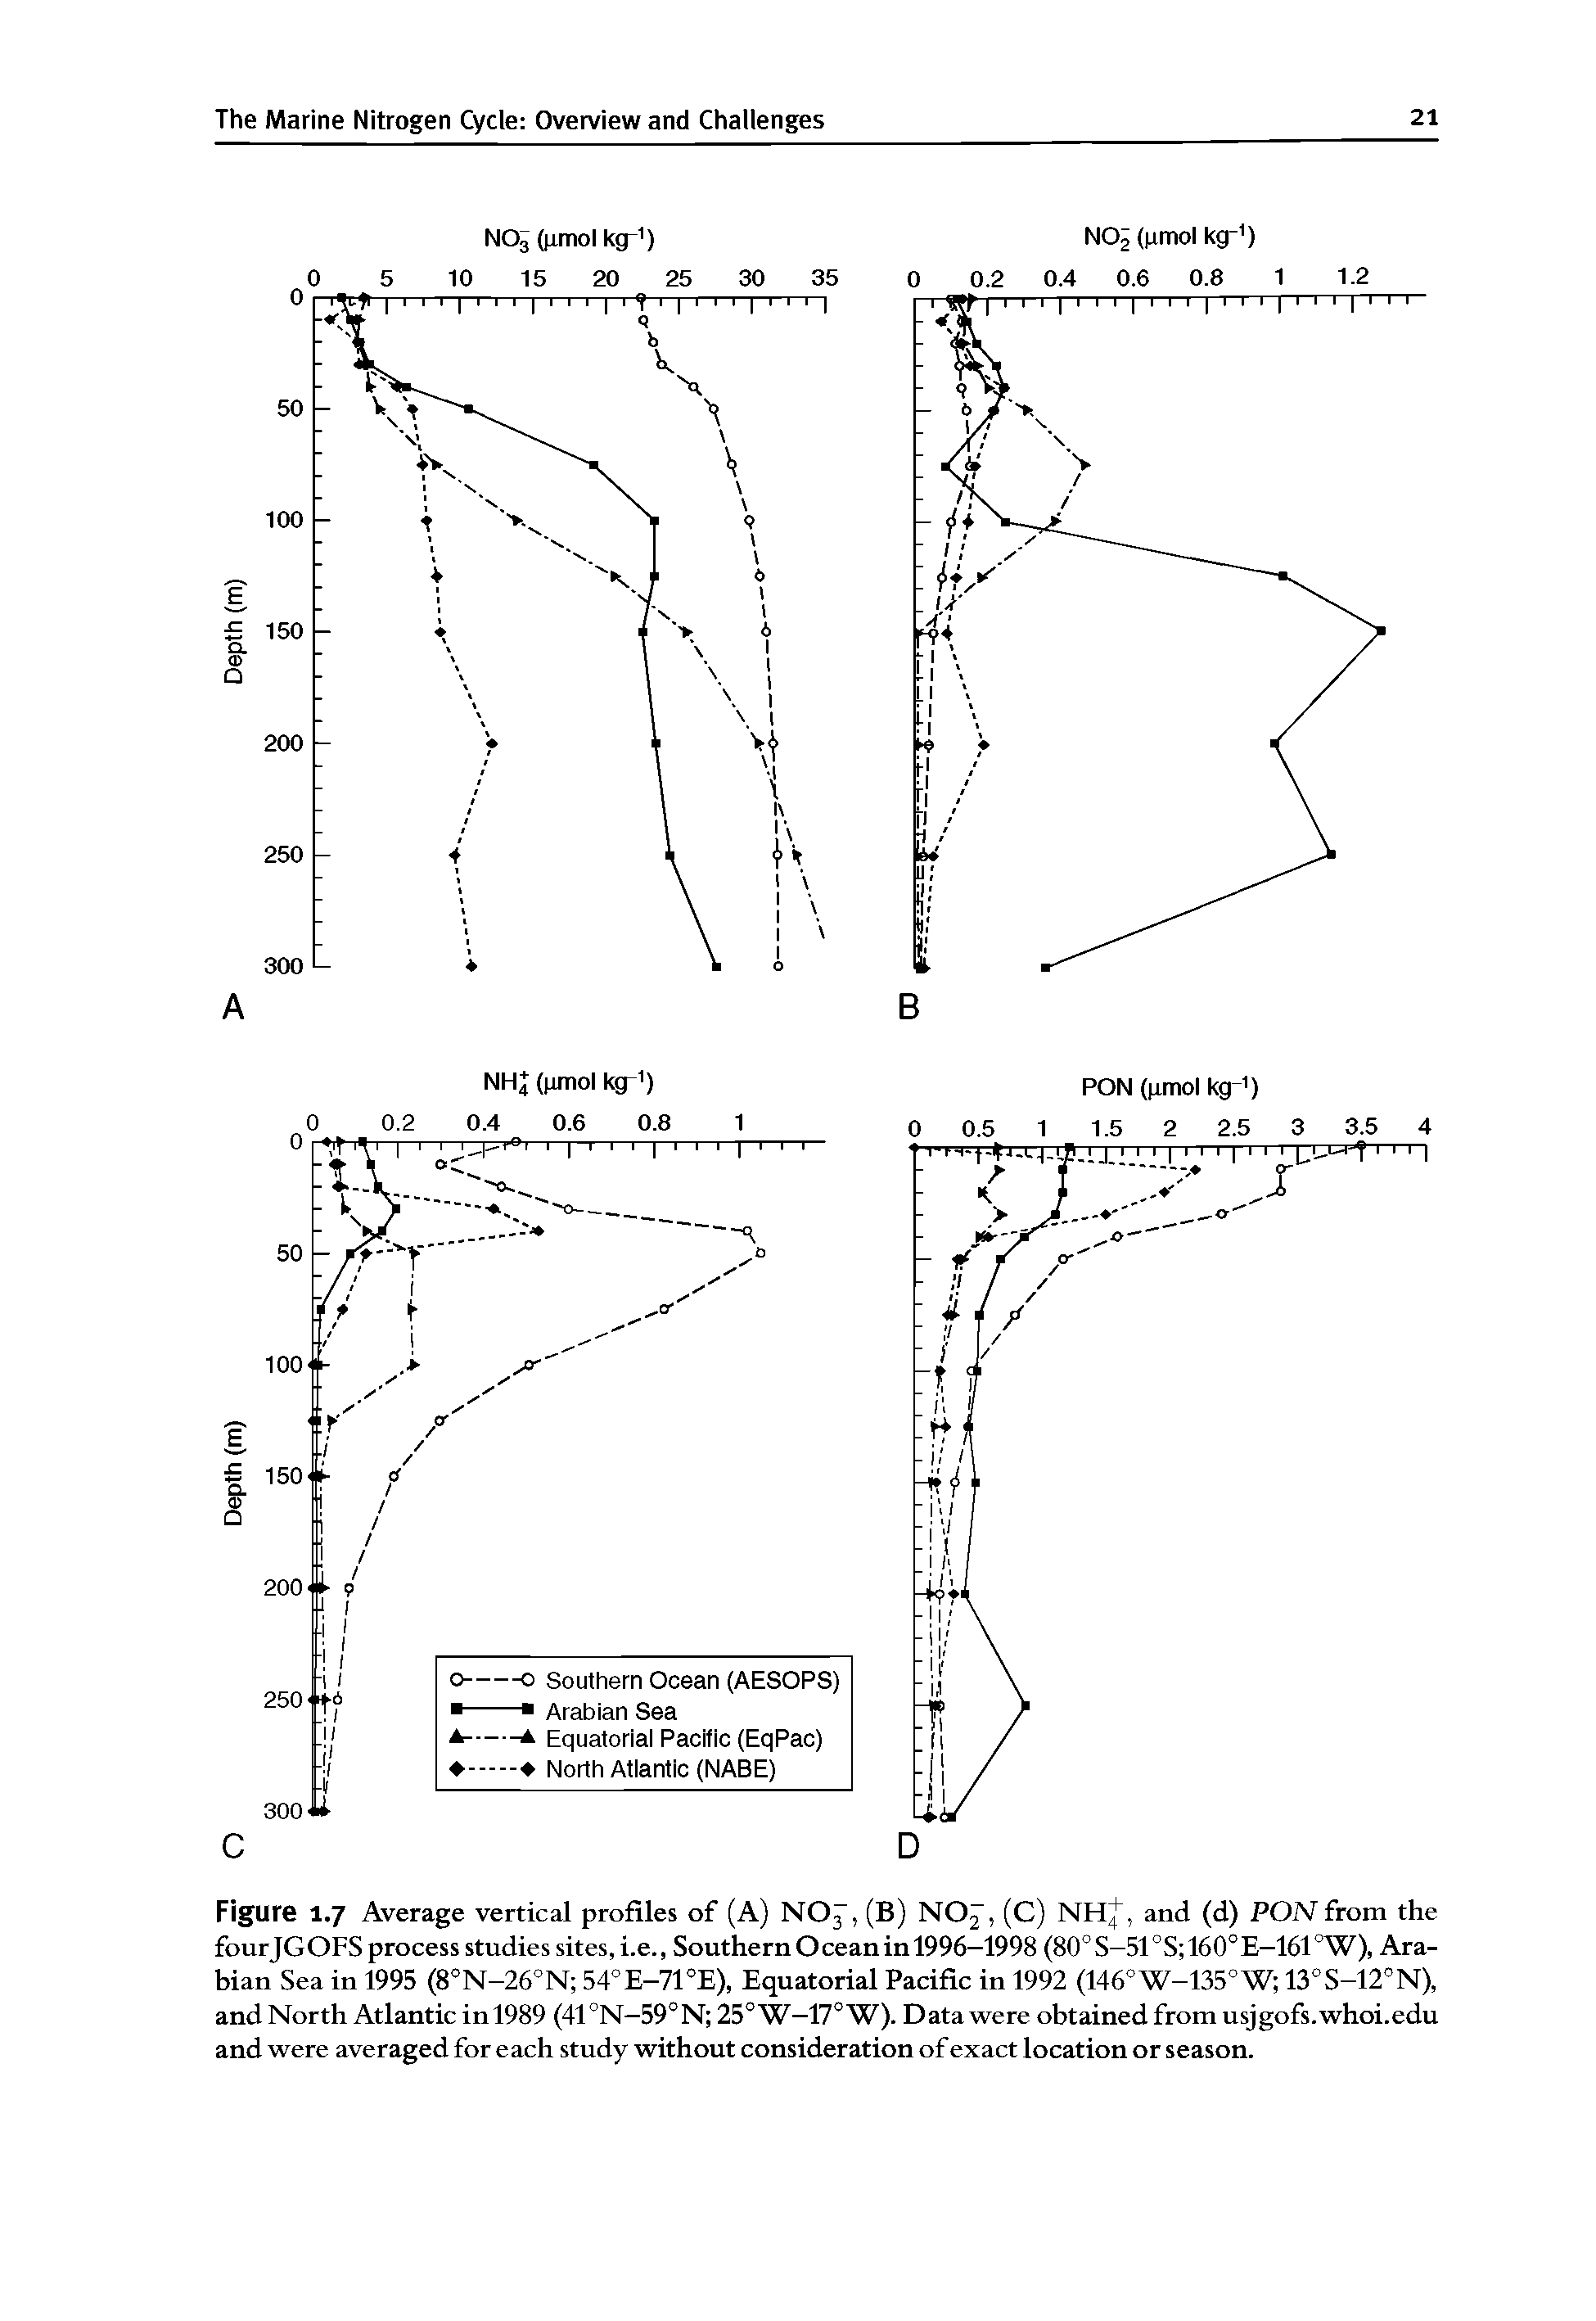 Figure 1.7 Average vertical profiles of (A) NO3, (B) NO2, (C) NH, and (d) PON from the fourJGOFS process studies sites, i.e., Southern Ocean in 1996-1998 (80°S-51°S 160°E-161°W), Arabian Sea in 1995 (8°N-26°N 54°E-71°E), Equatorial Pacific in 1992 (146°W-135°W 13°S-12 N), and North Atlantic in 1989 (41°N-59°N 25°W-17°W). Data were obtained from usjgofs.whoi.edu and were averaged for each study without consideration of exact location or season.